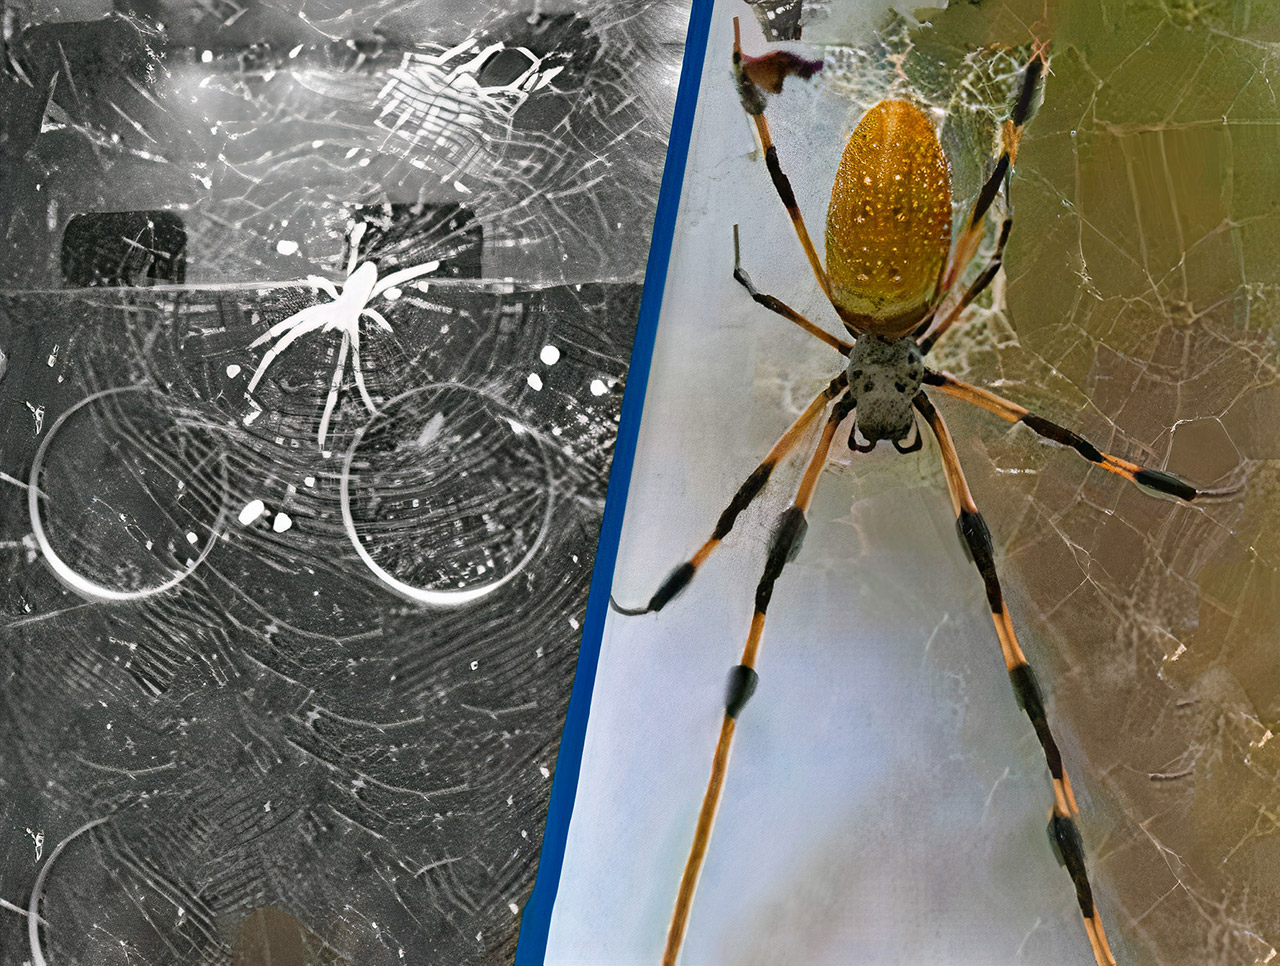 Spiders Discover Creative Way To Make Webs Without Gravity Aboard The